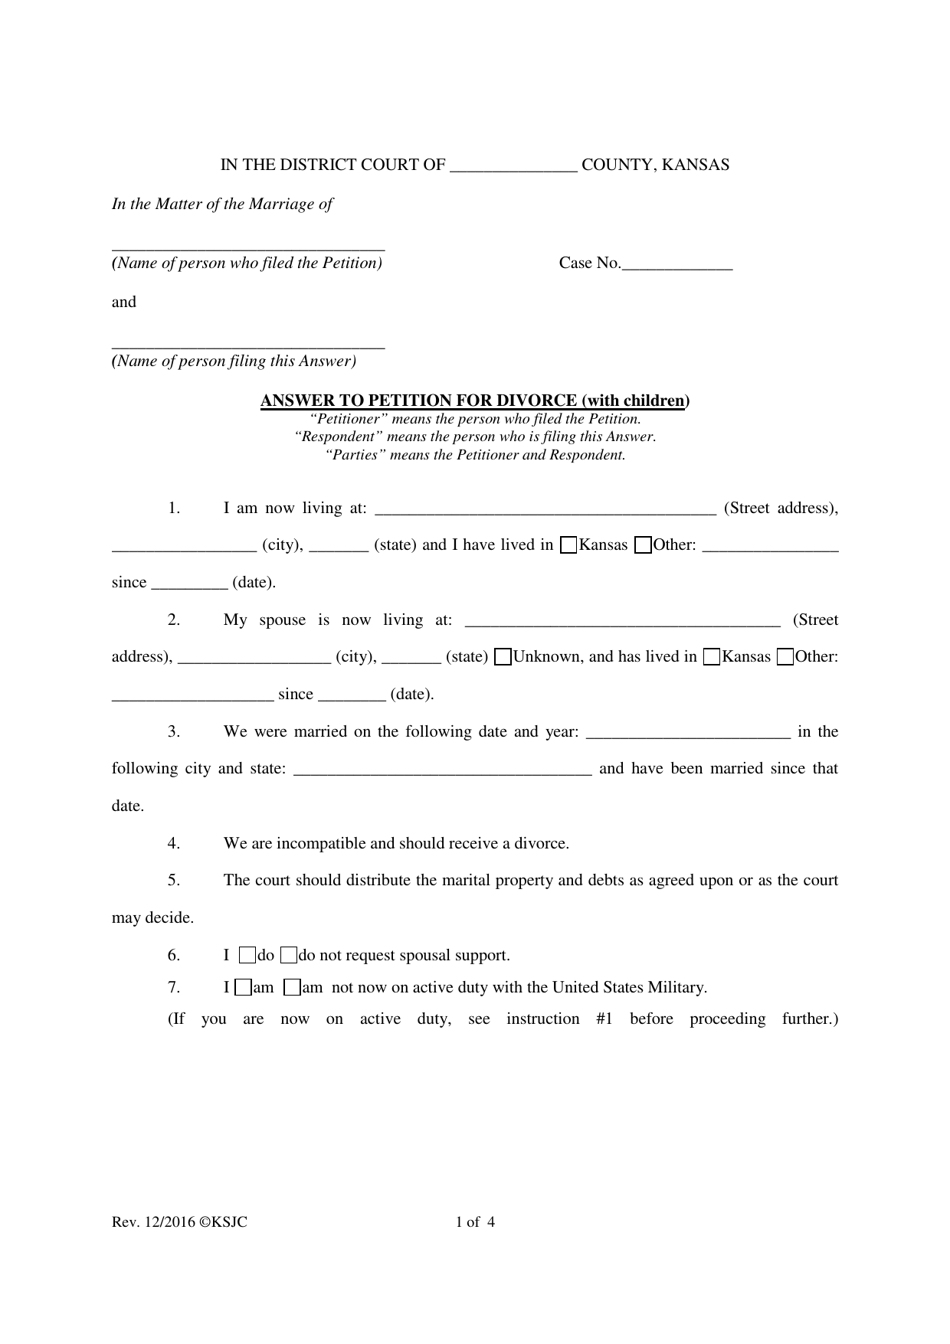 Answer to Petition for Divorce (With Children) - Kansas, Page 1